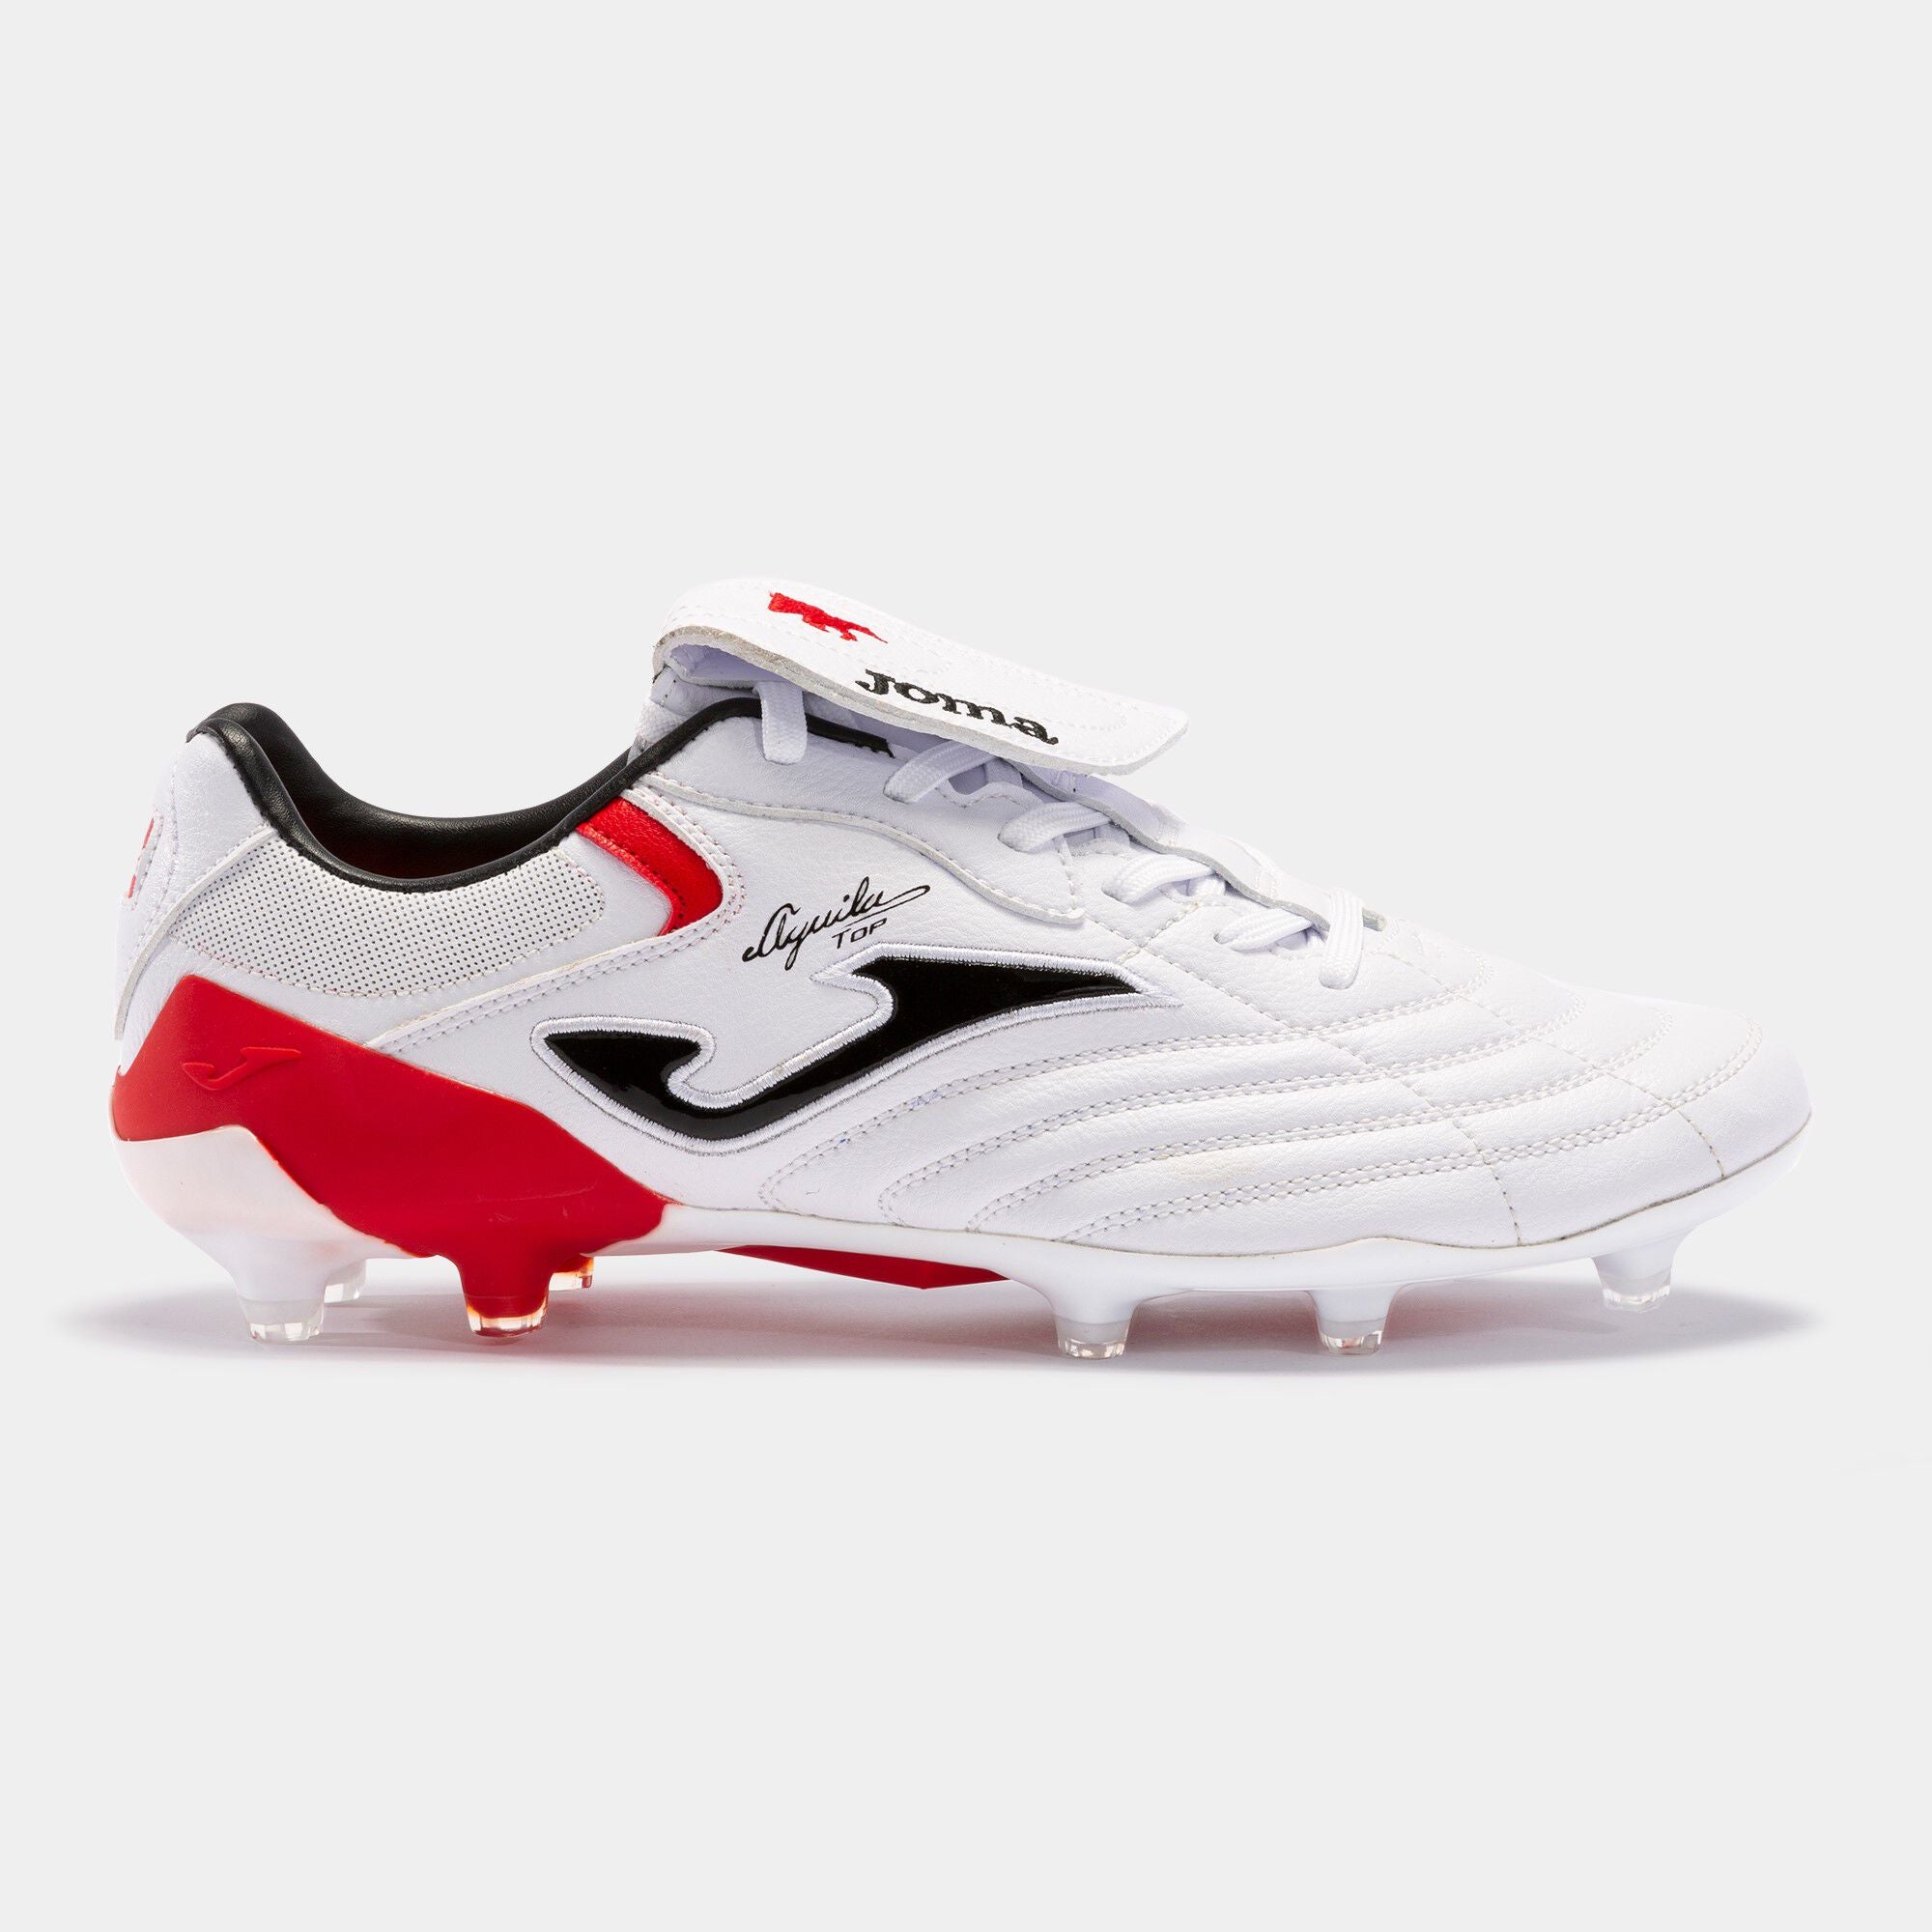 Joma Aguila Cup 2302 FG-White/Red